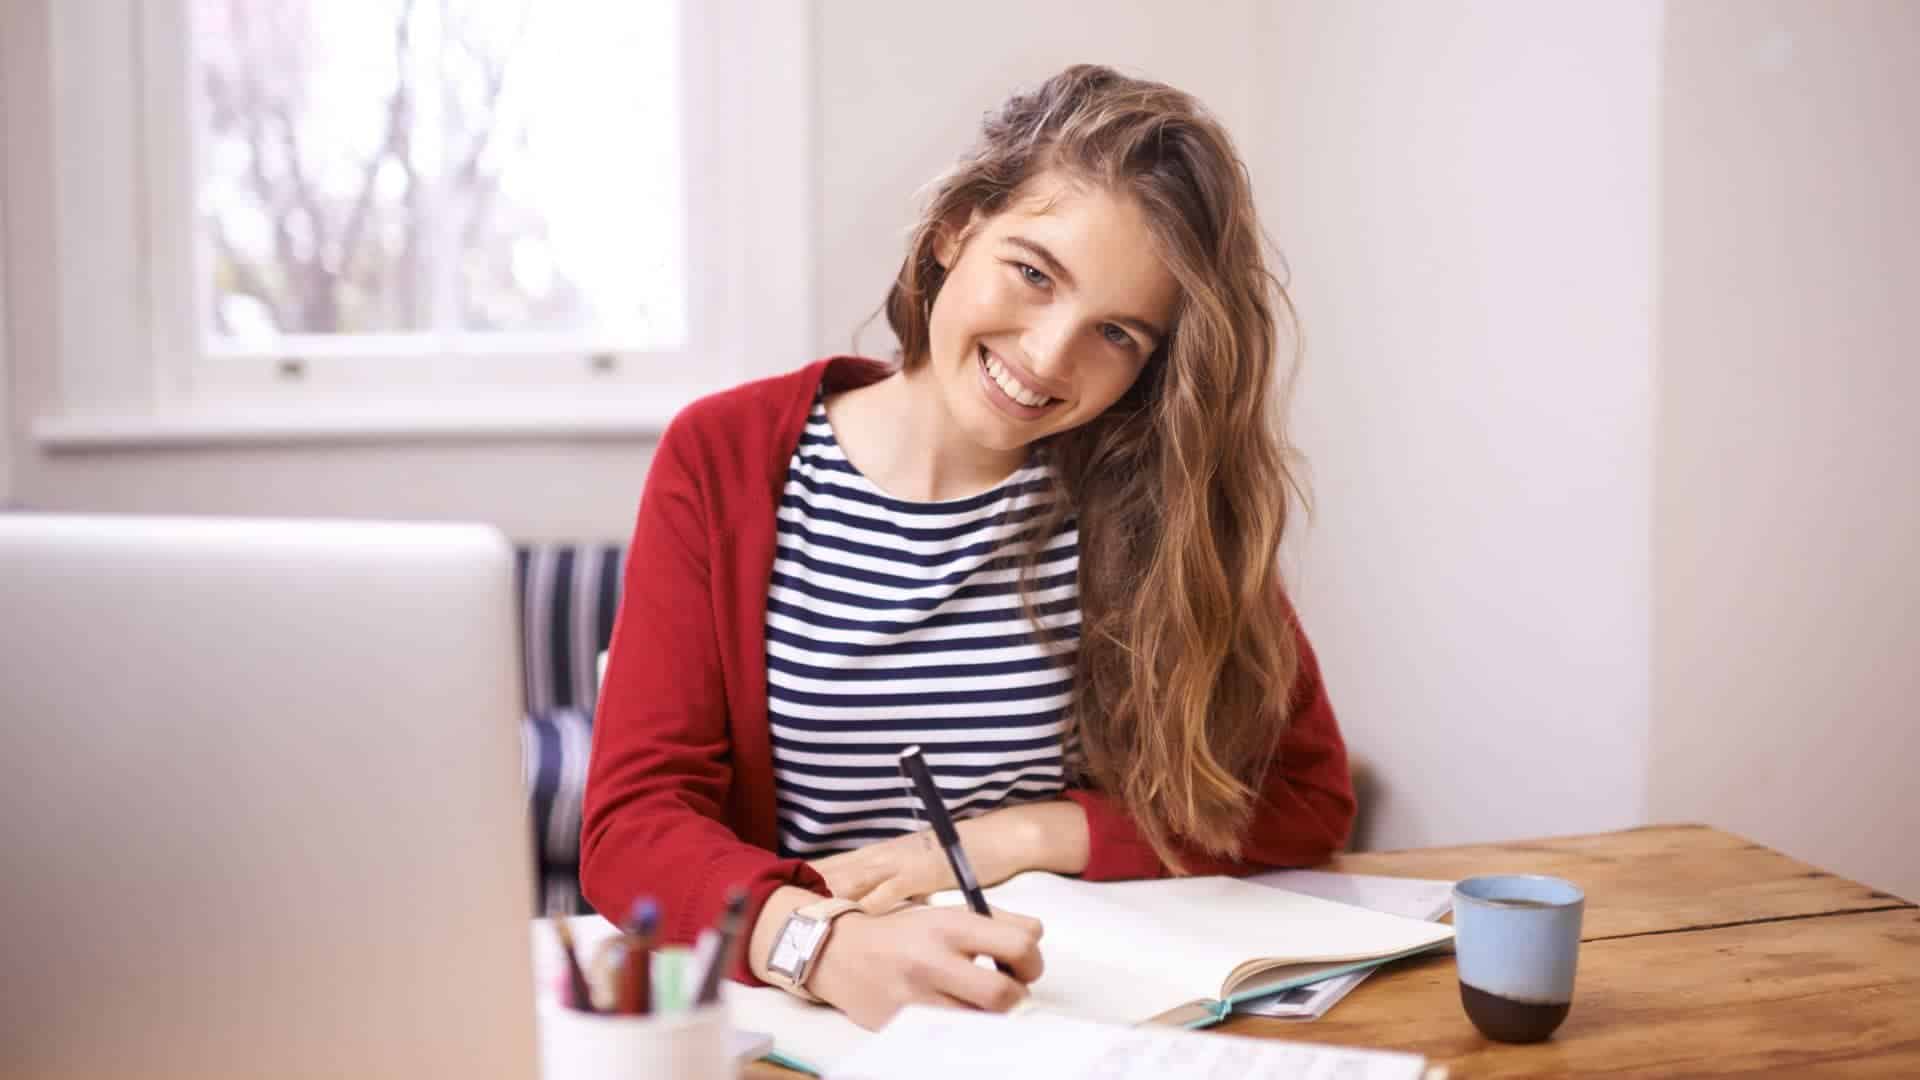 female student writing in her note book while smiling